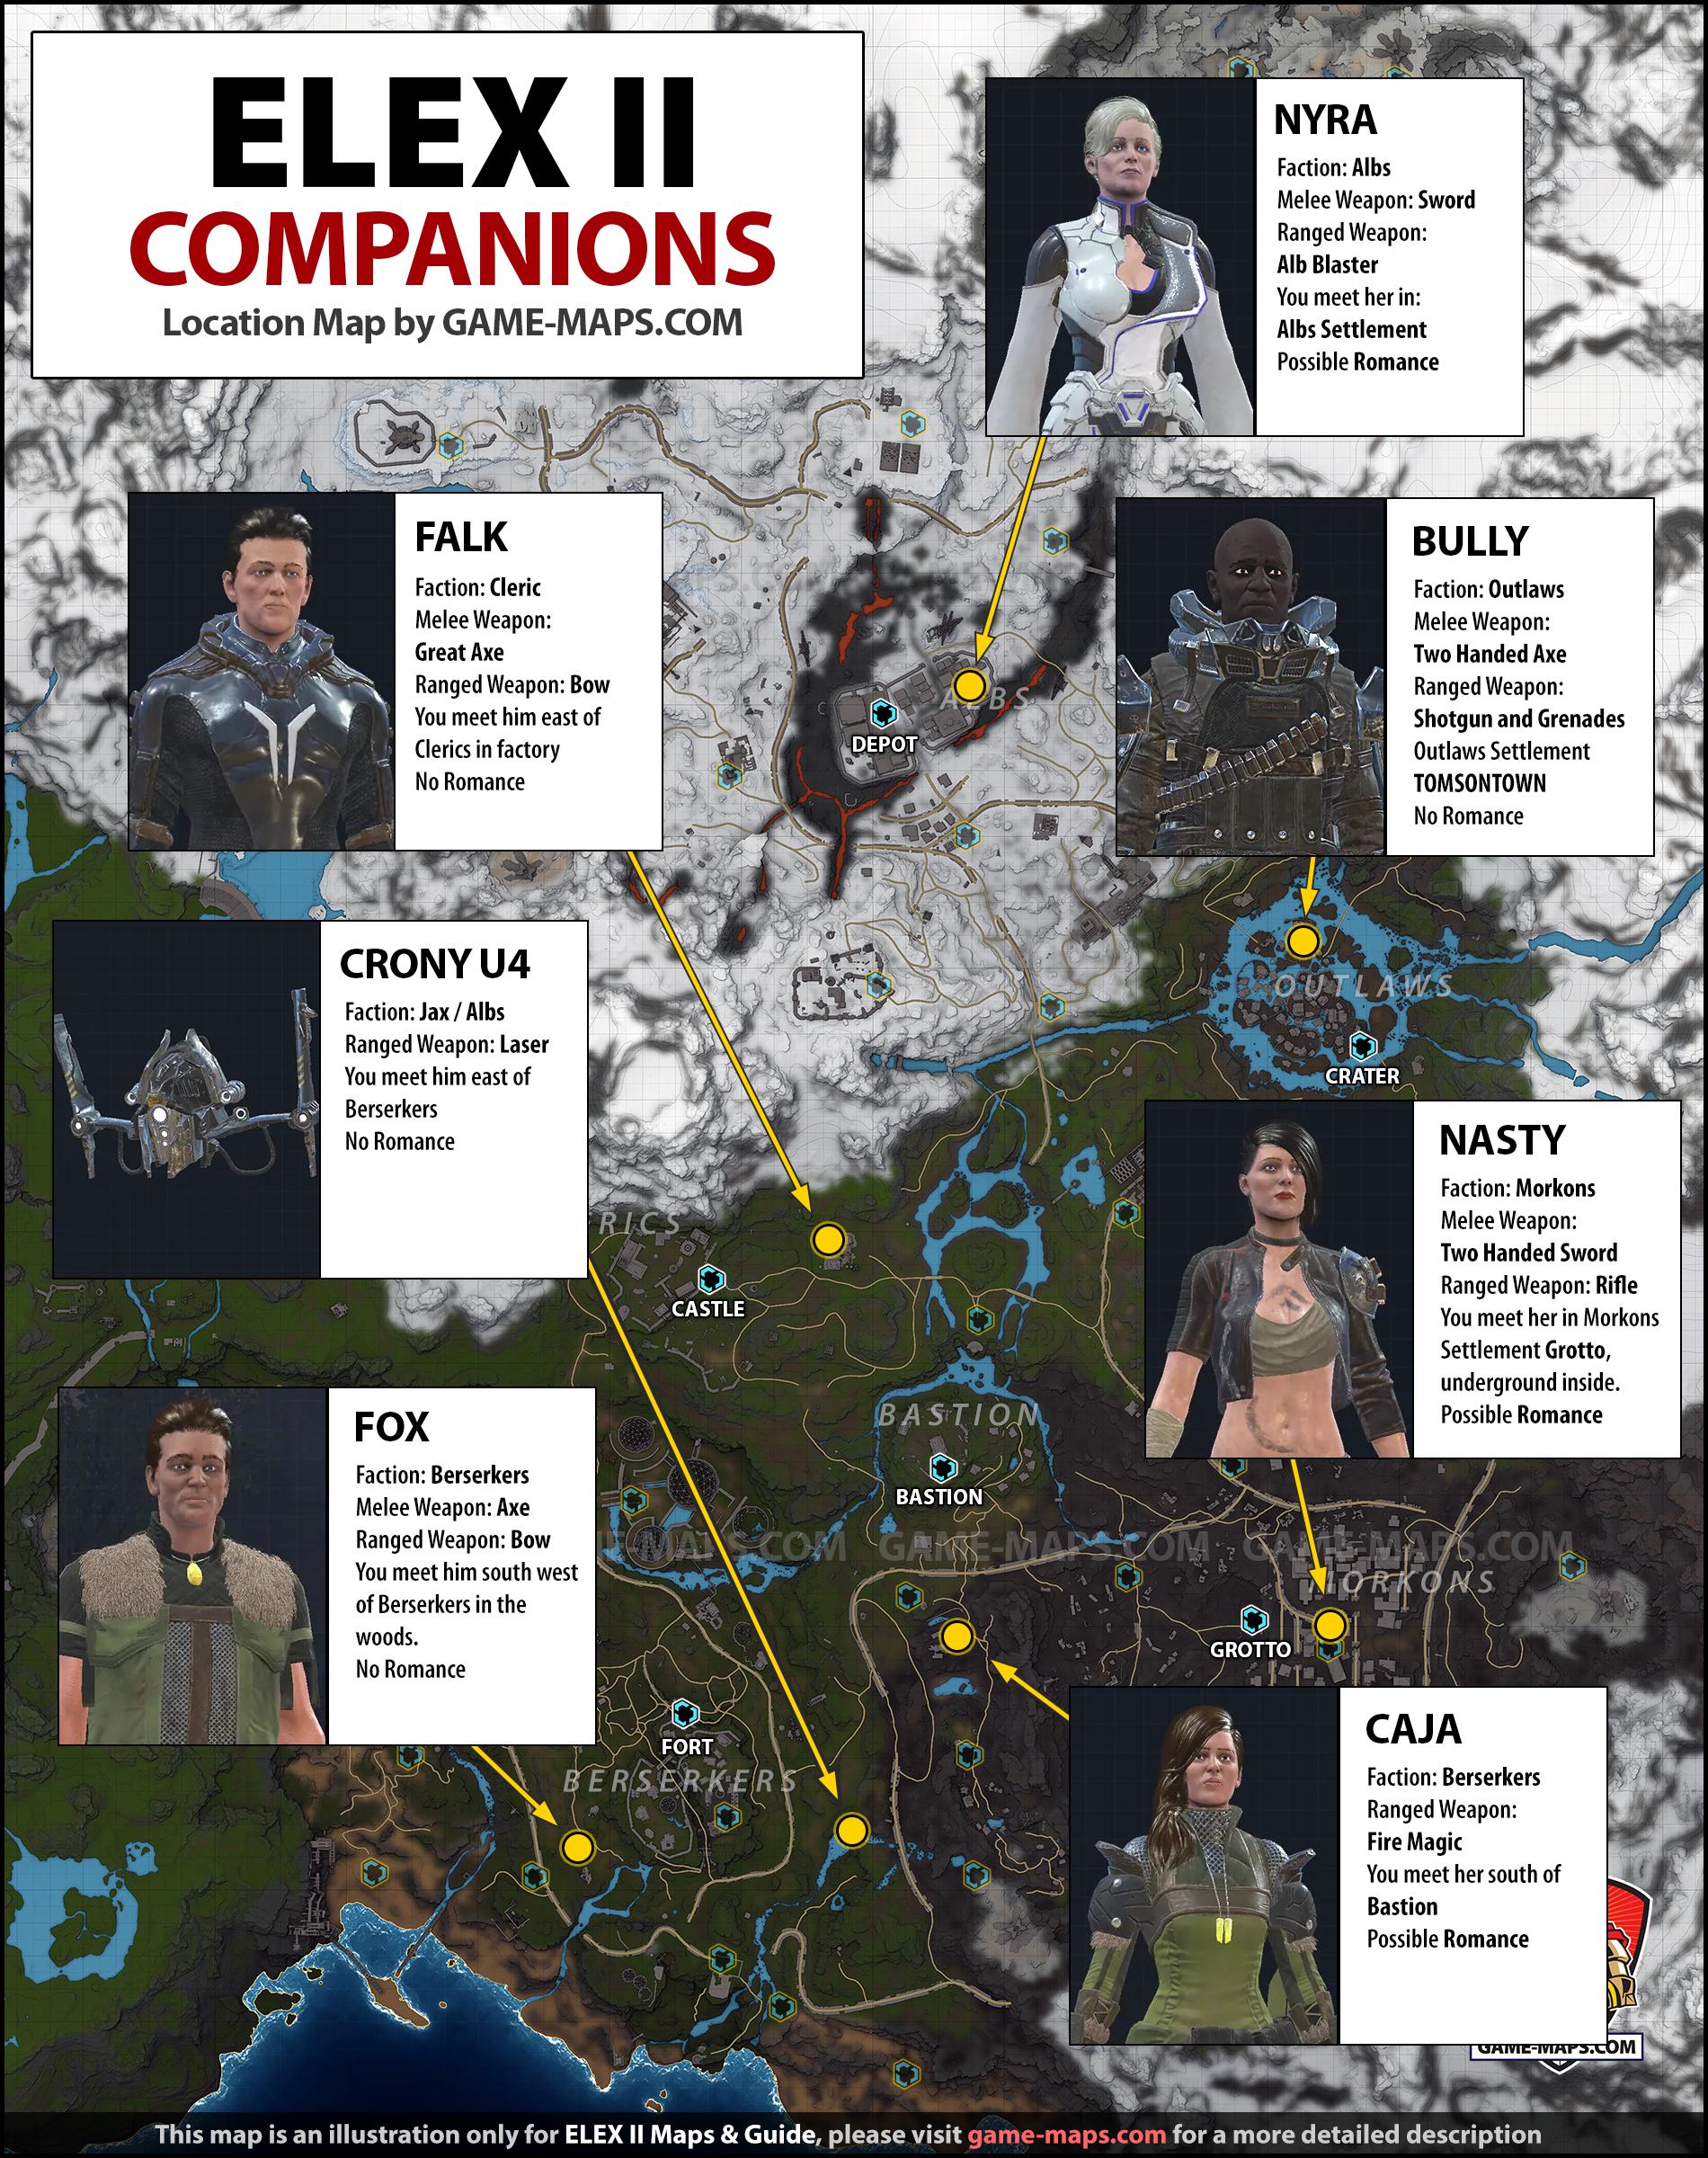 Map for ELEX II with location of Companions